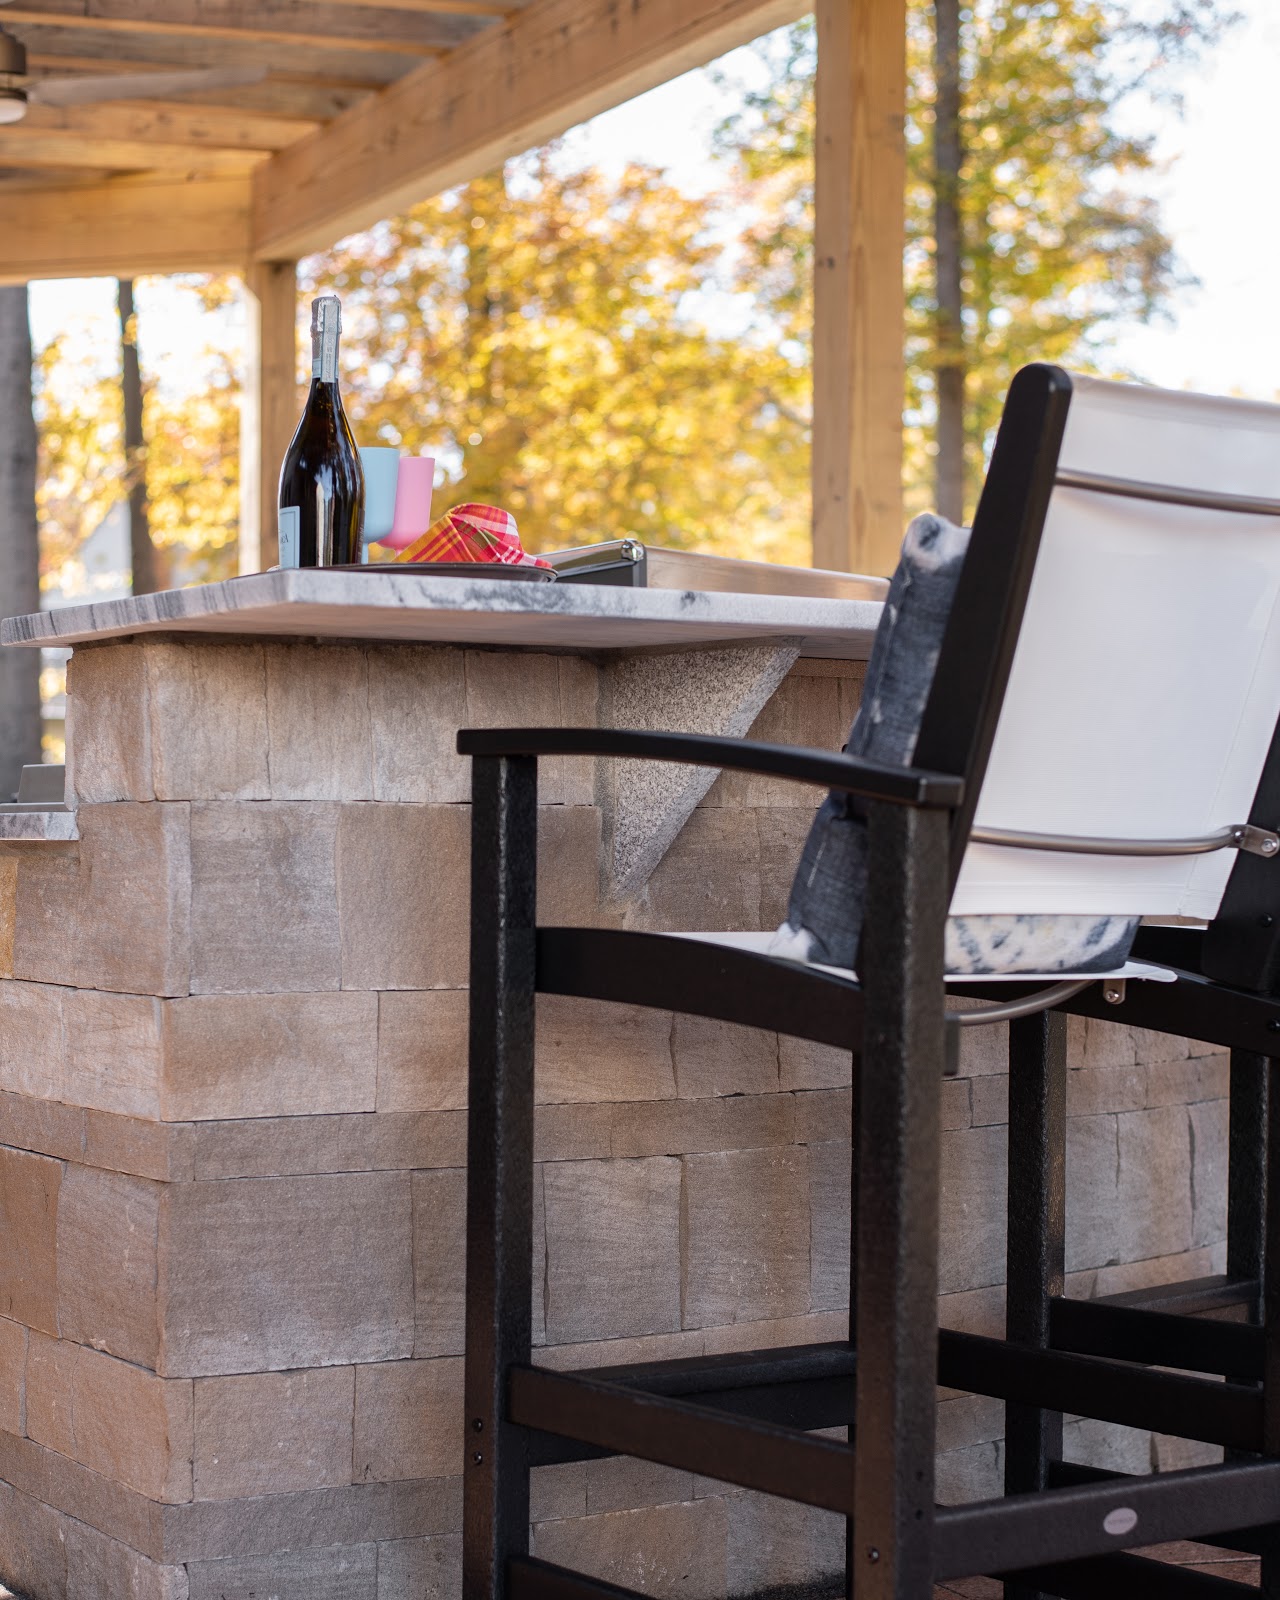 Outdoor kitchen with Polycor's Indiana Limestone veneer